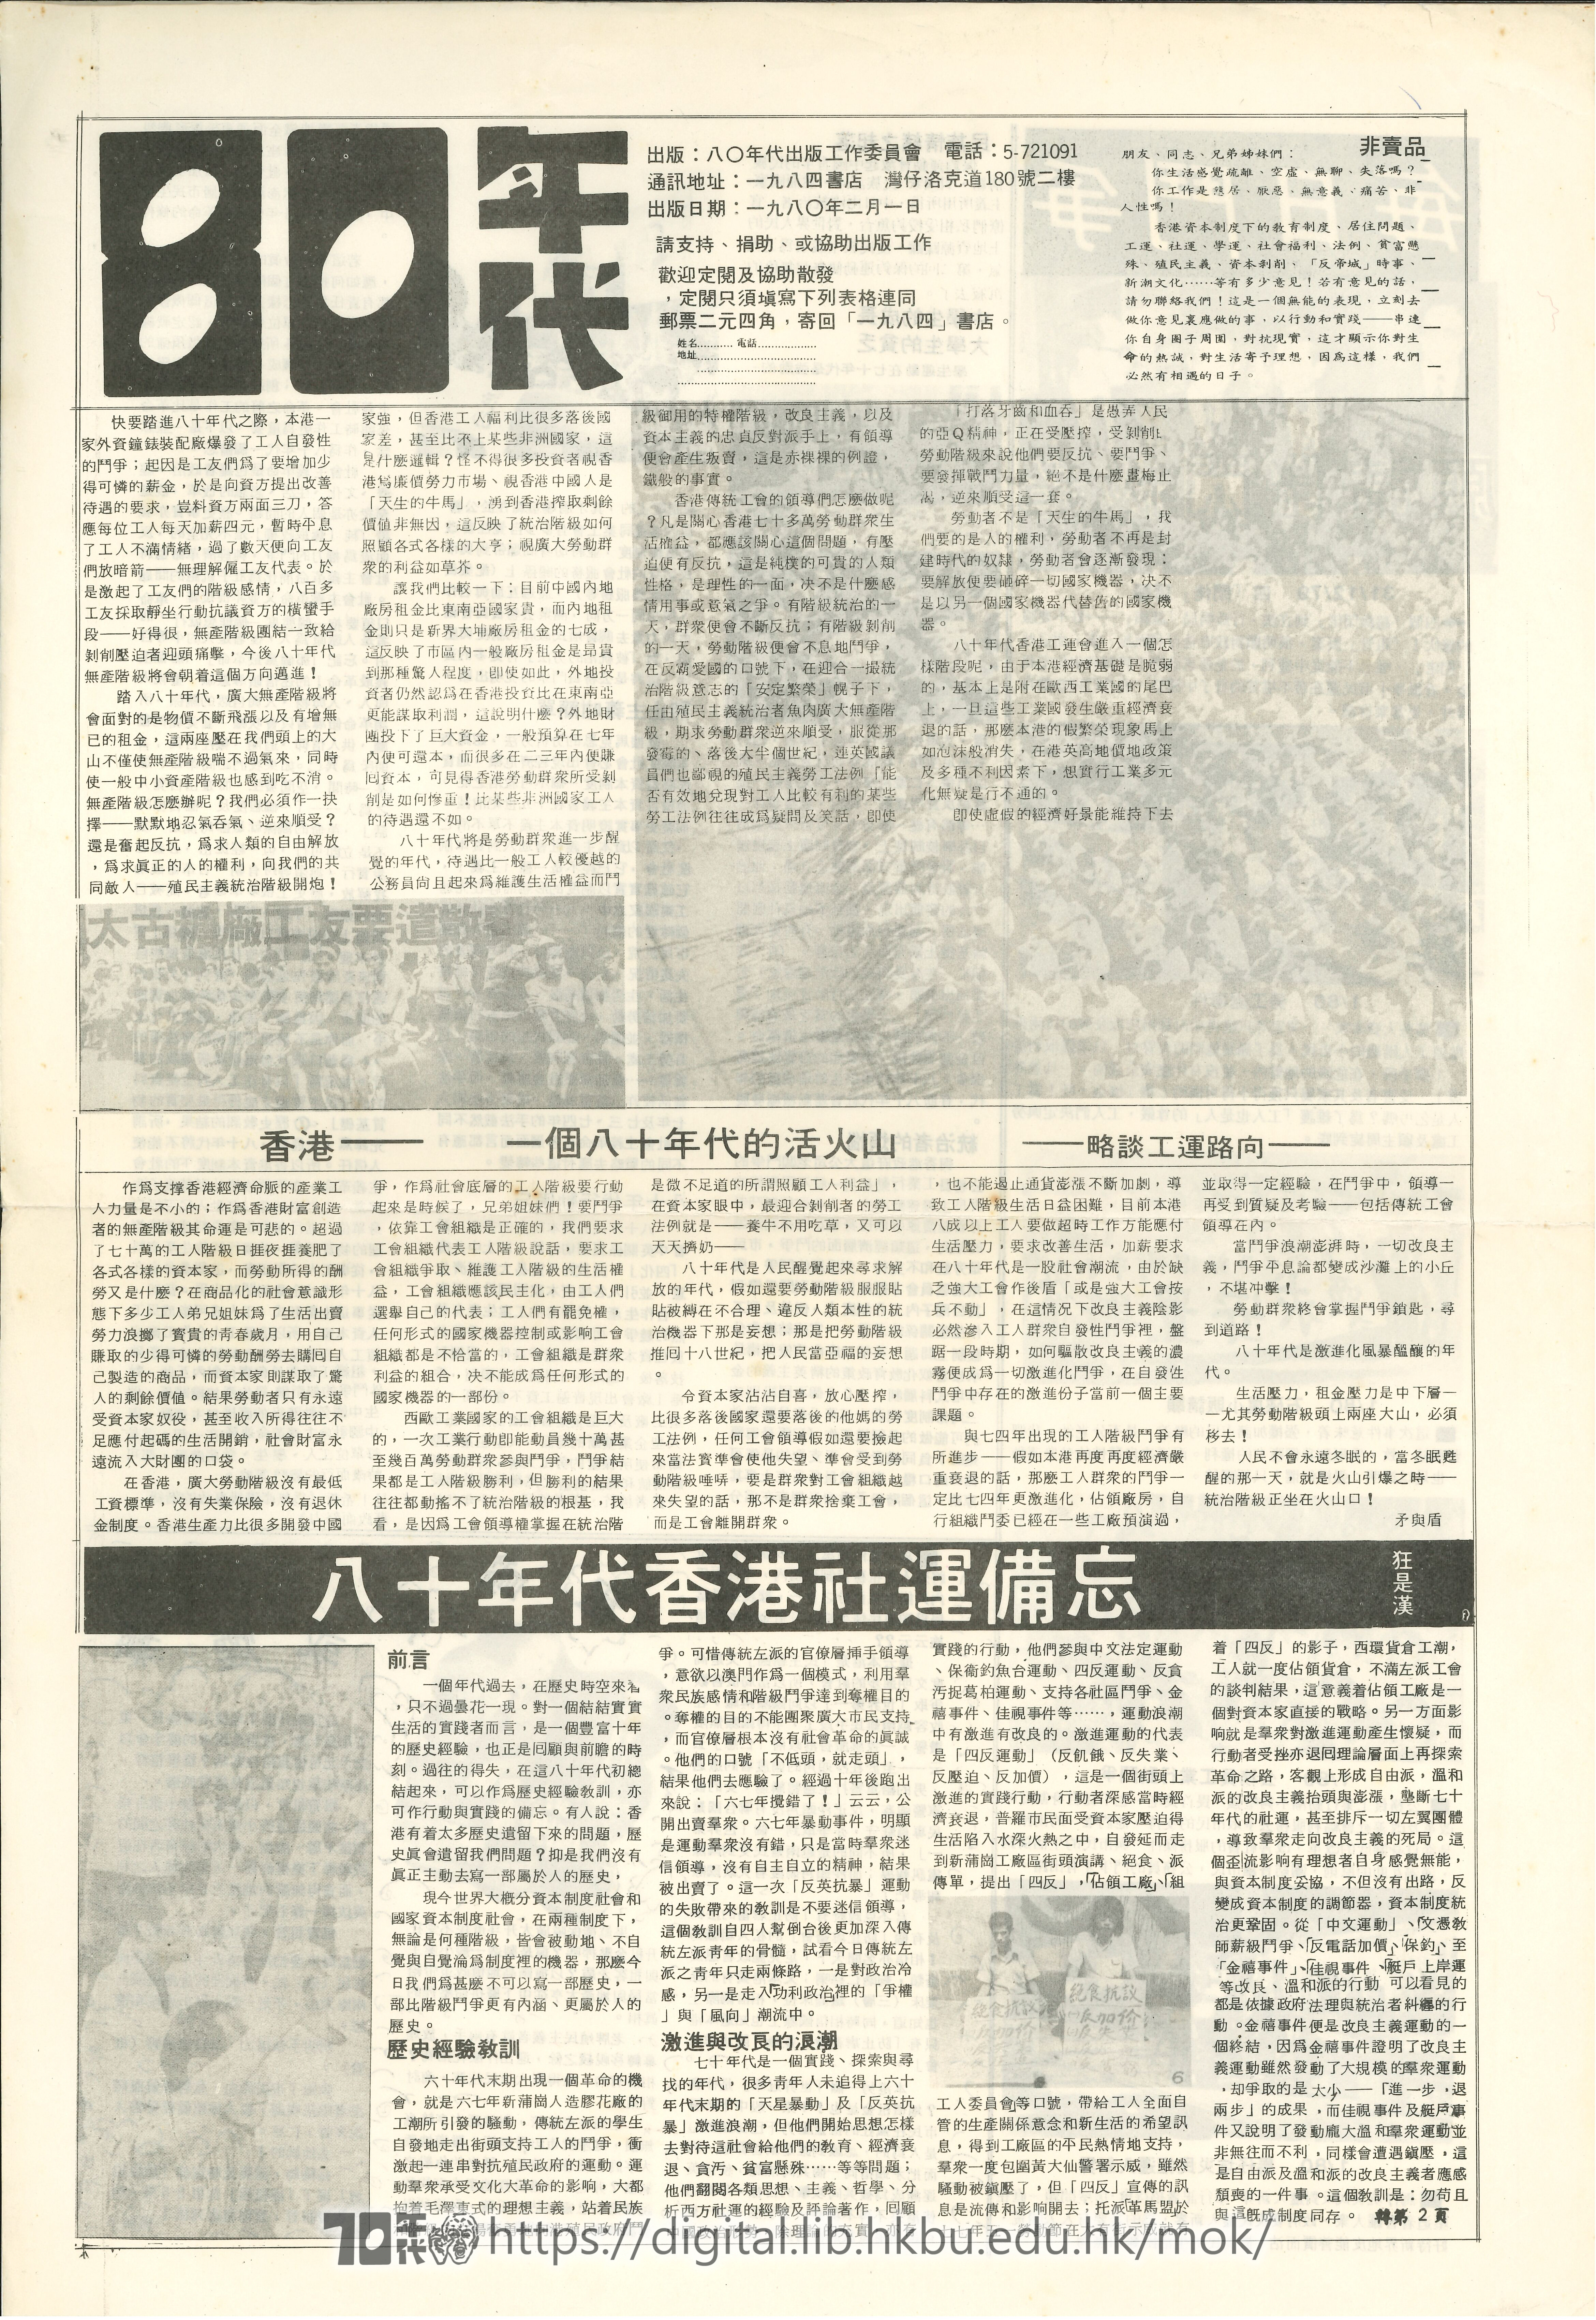   Social movement of Hong Kong in the 1980s 狂是漢 